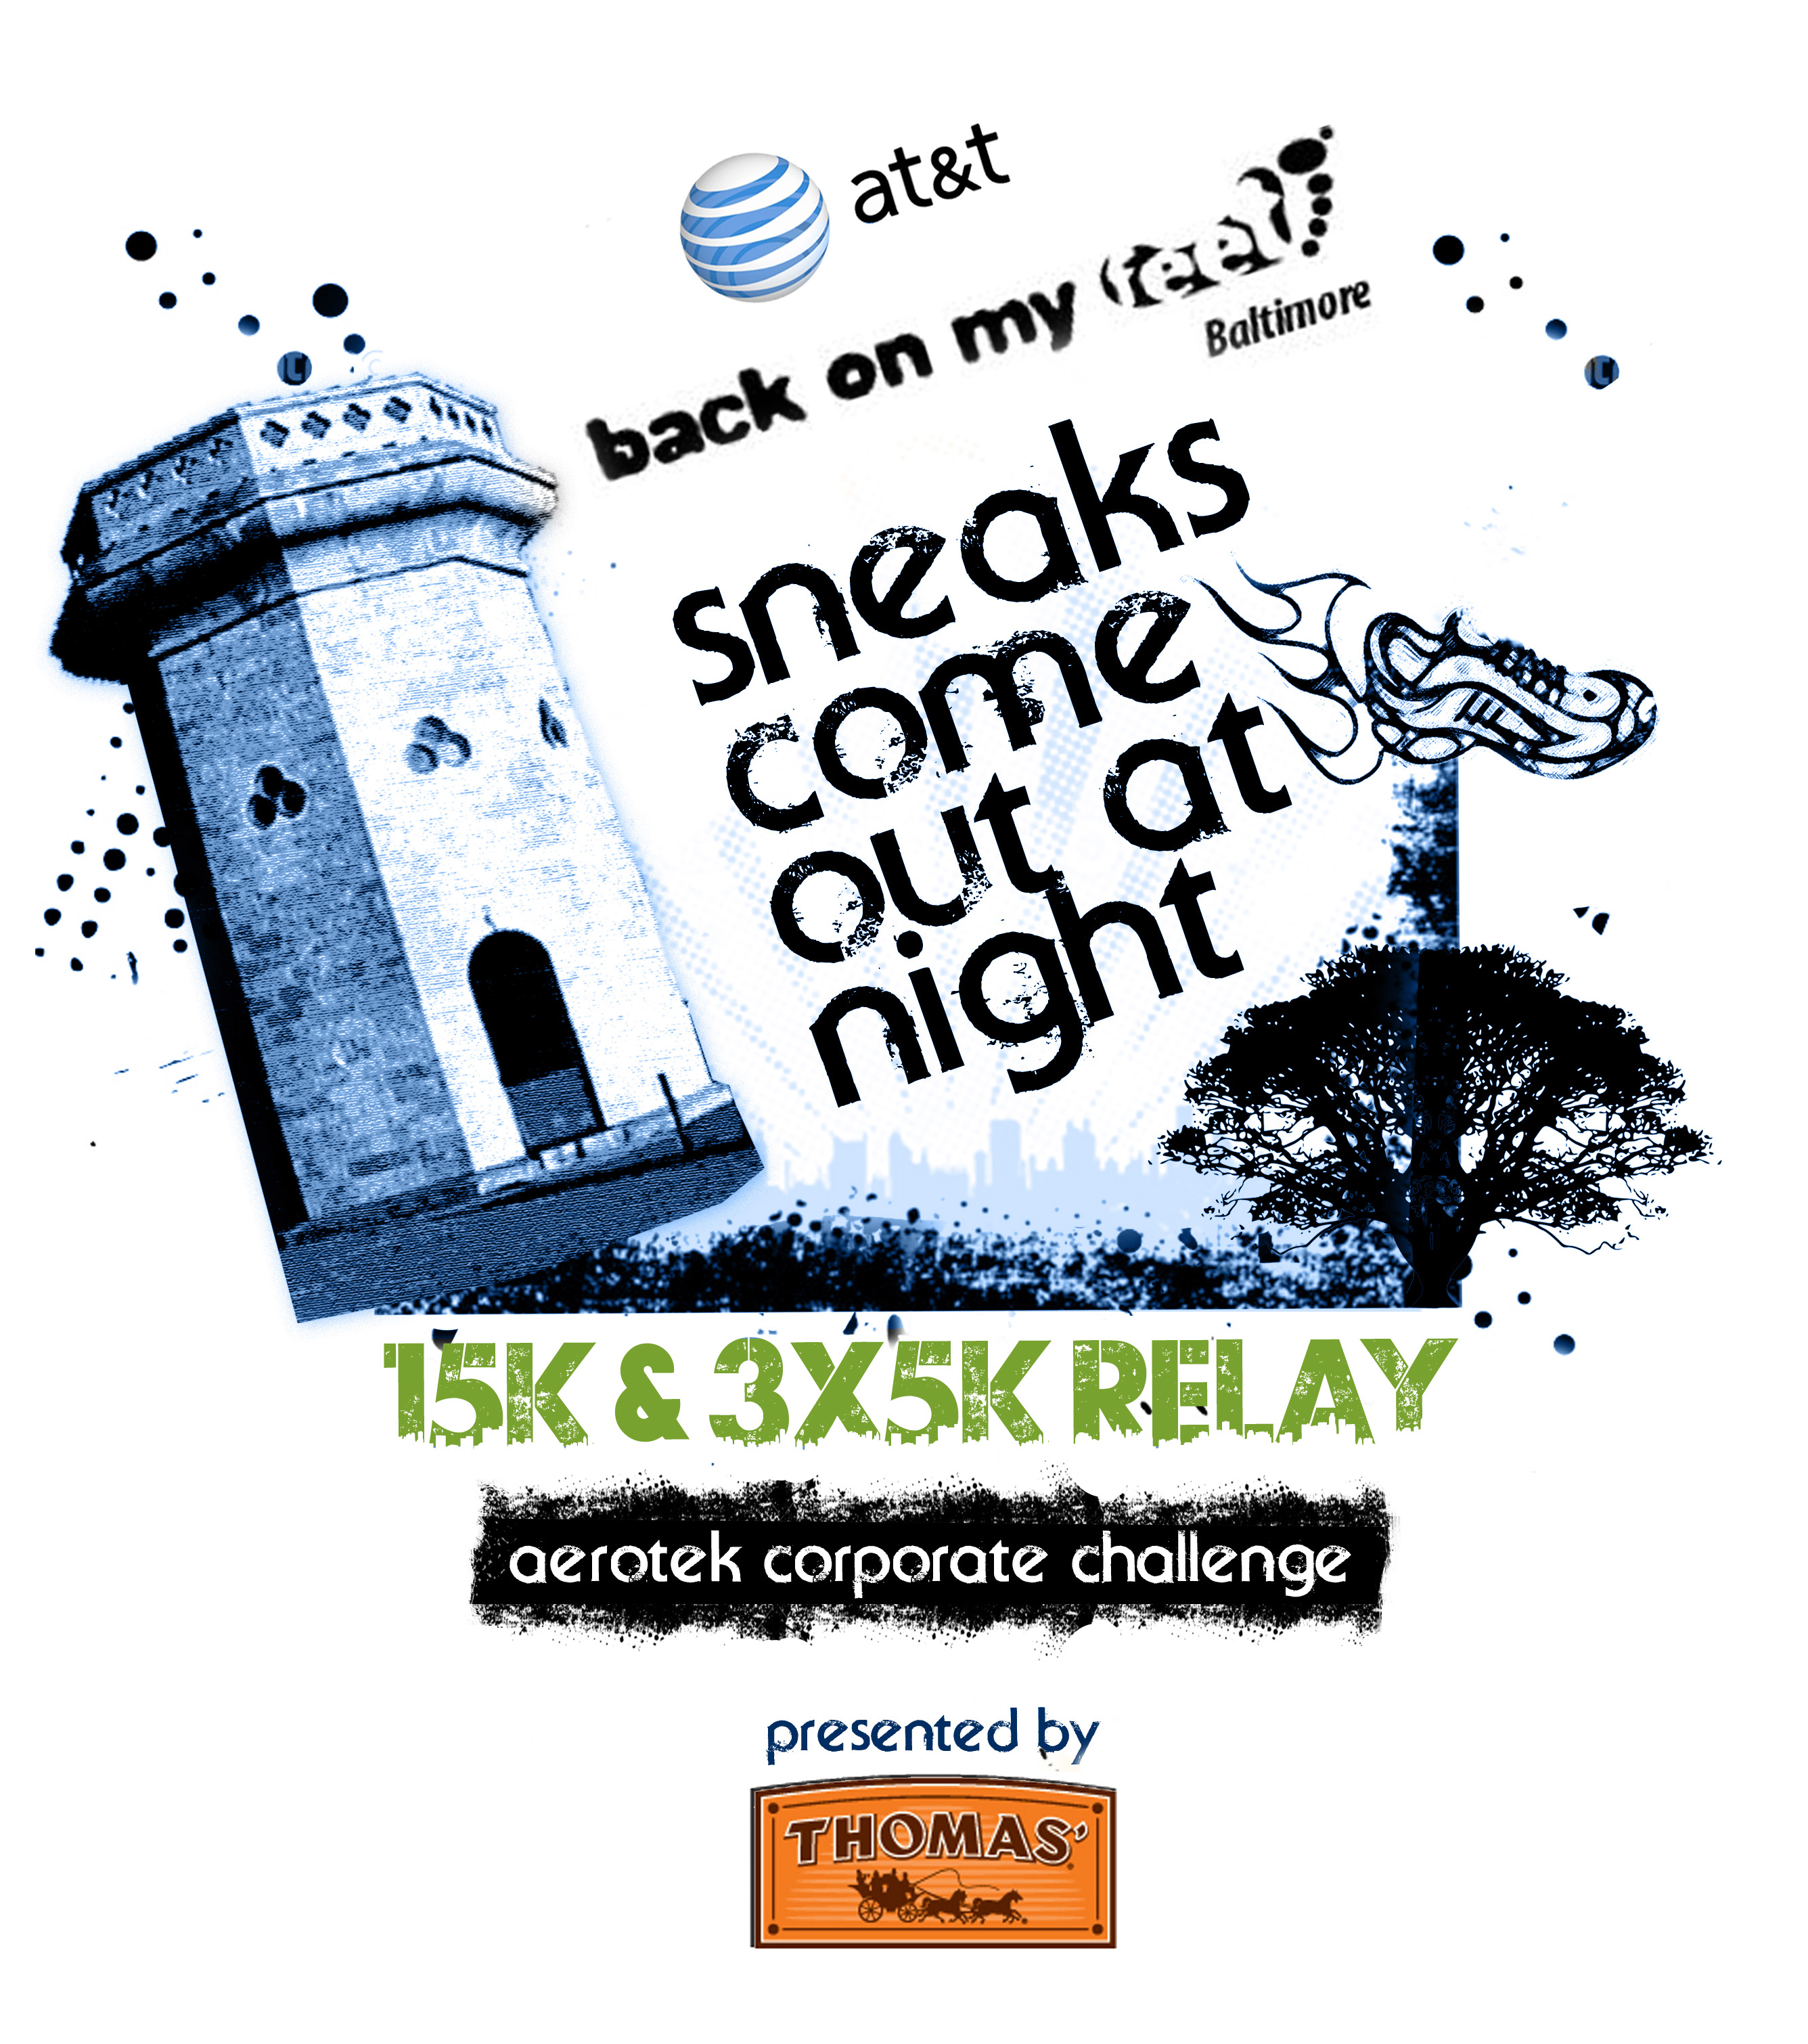 The AT&T Back on My Feet Baltimore Sneaks Come Out at Night 15K, 3x5K Relay & Aerotek Corporate Challenge presented by Thomas'